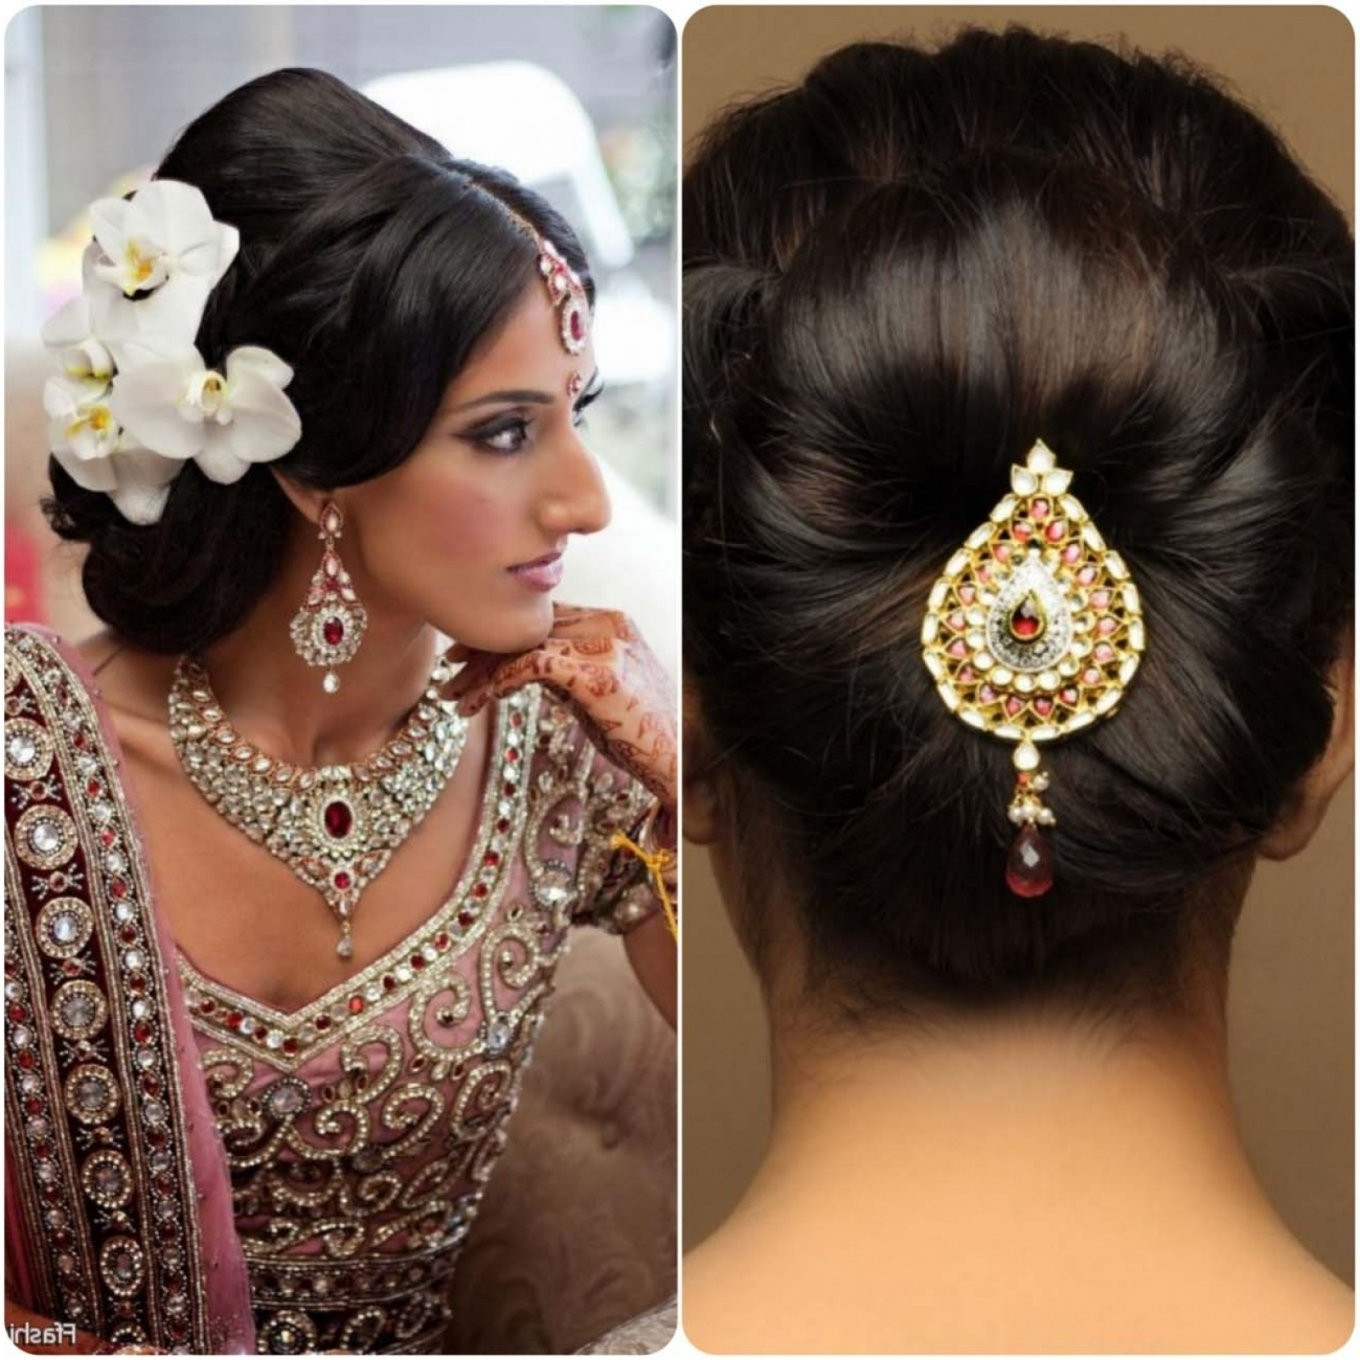 Indian Wedding Hairstyles For Short Hair
 2019 Latest Indian Wedding Hairstyles For Short And Thin Hair